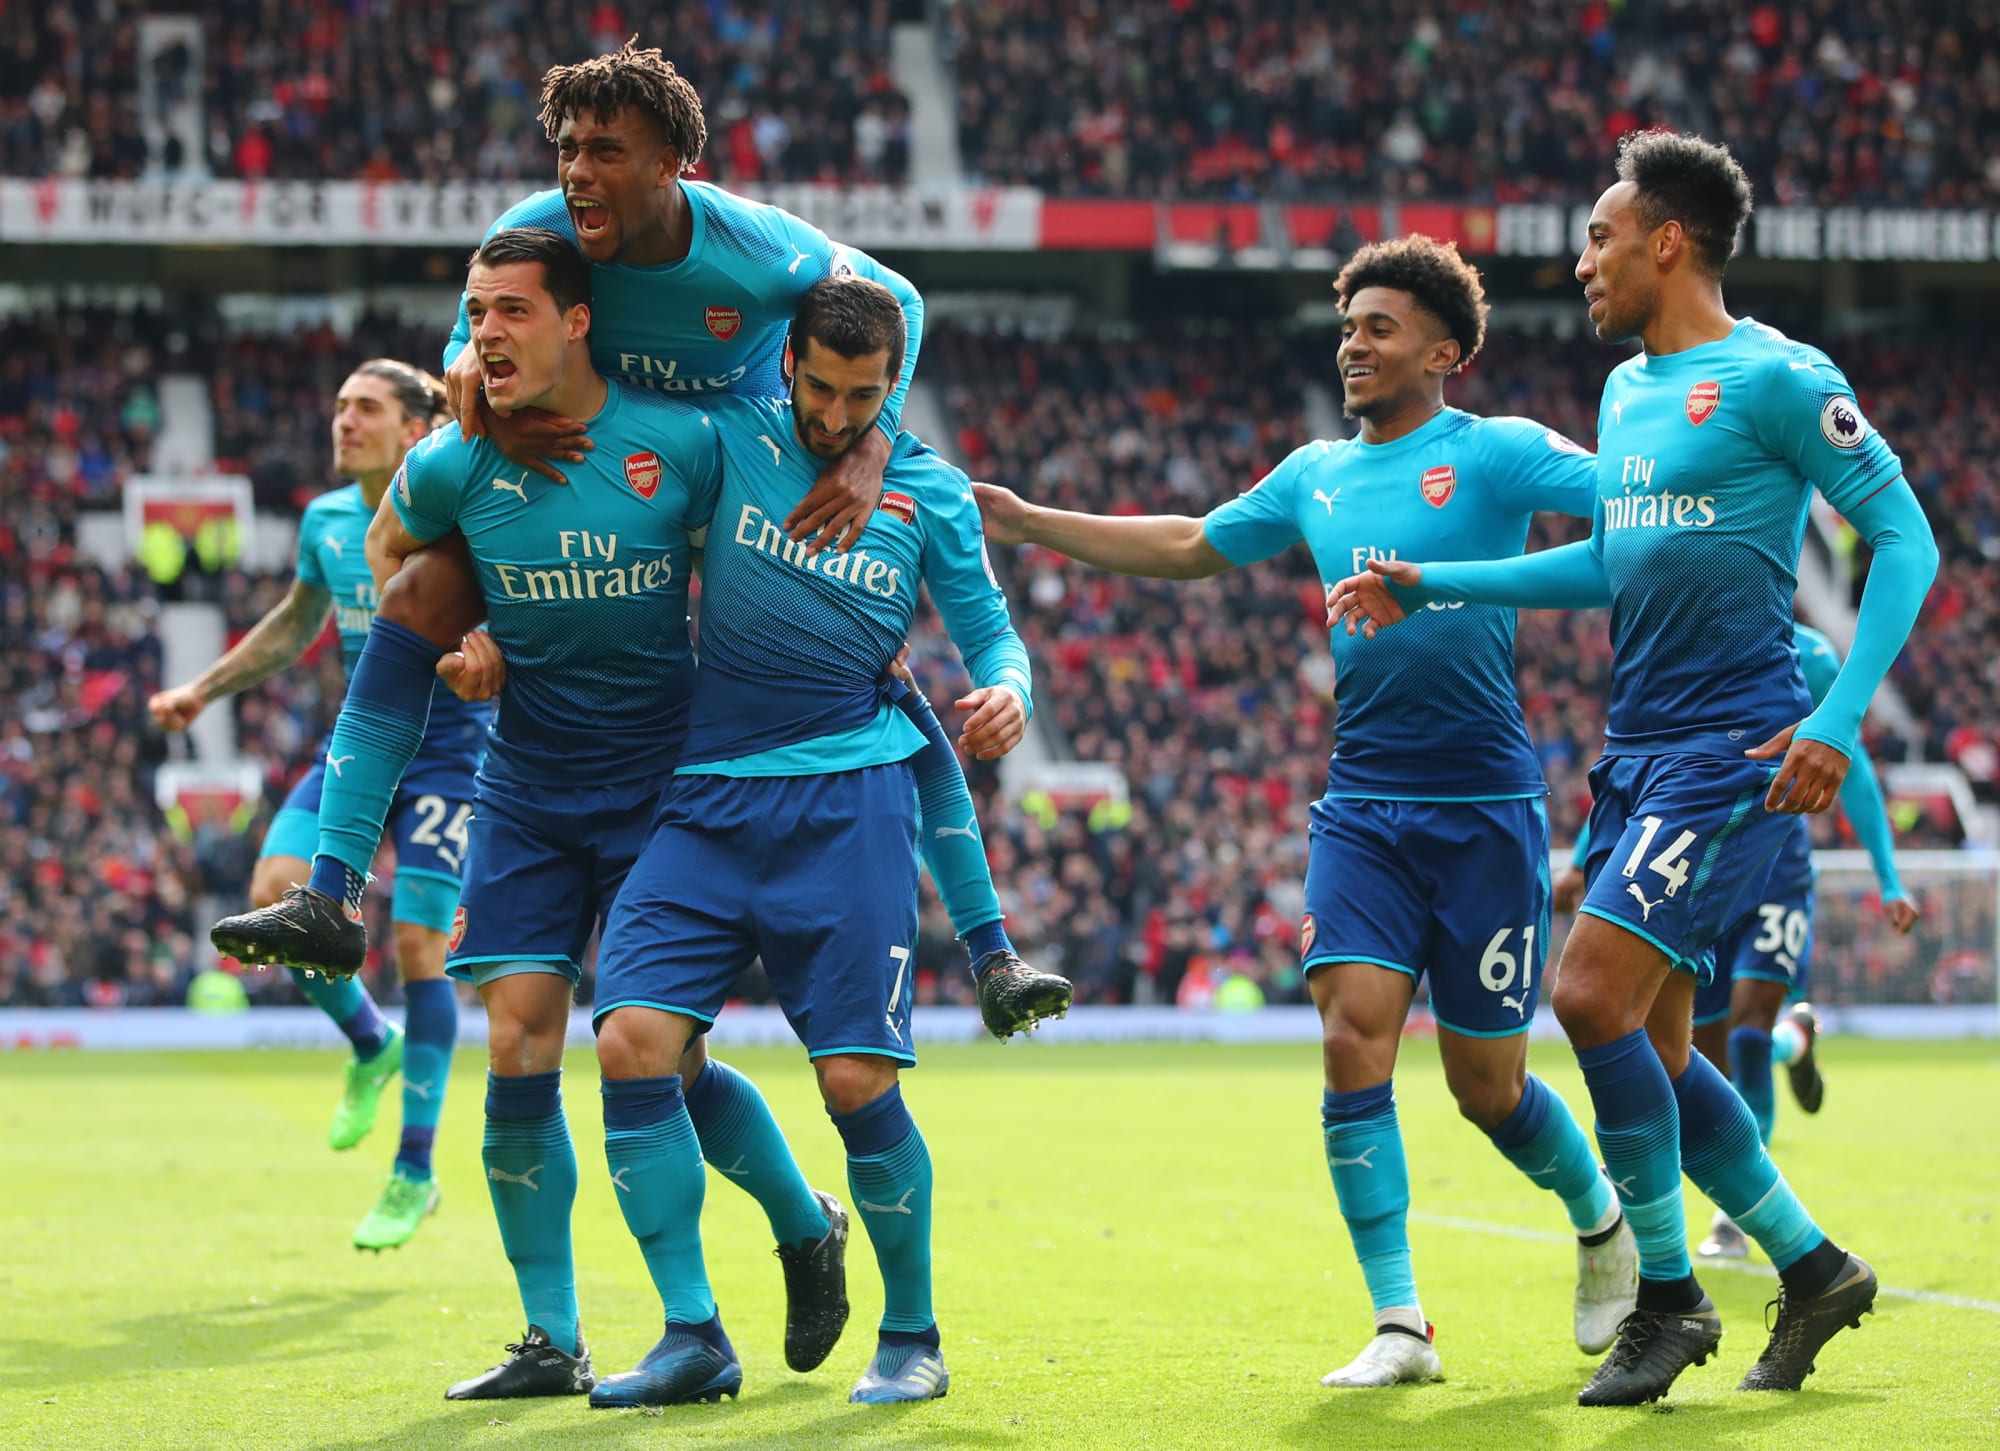 Arsenal Vs Manchester United: Highlights and analysis ...